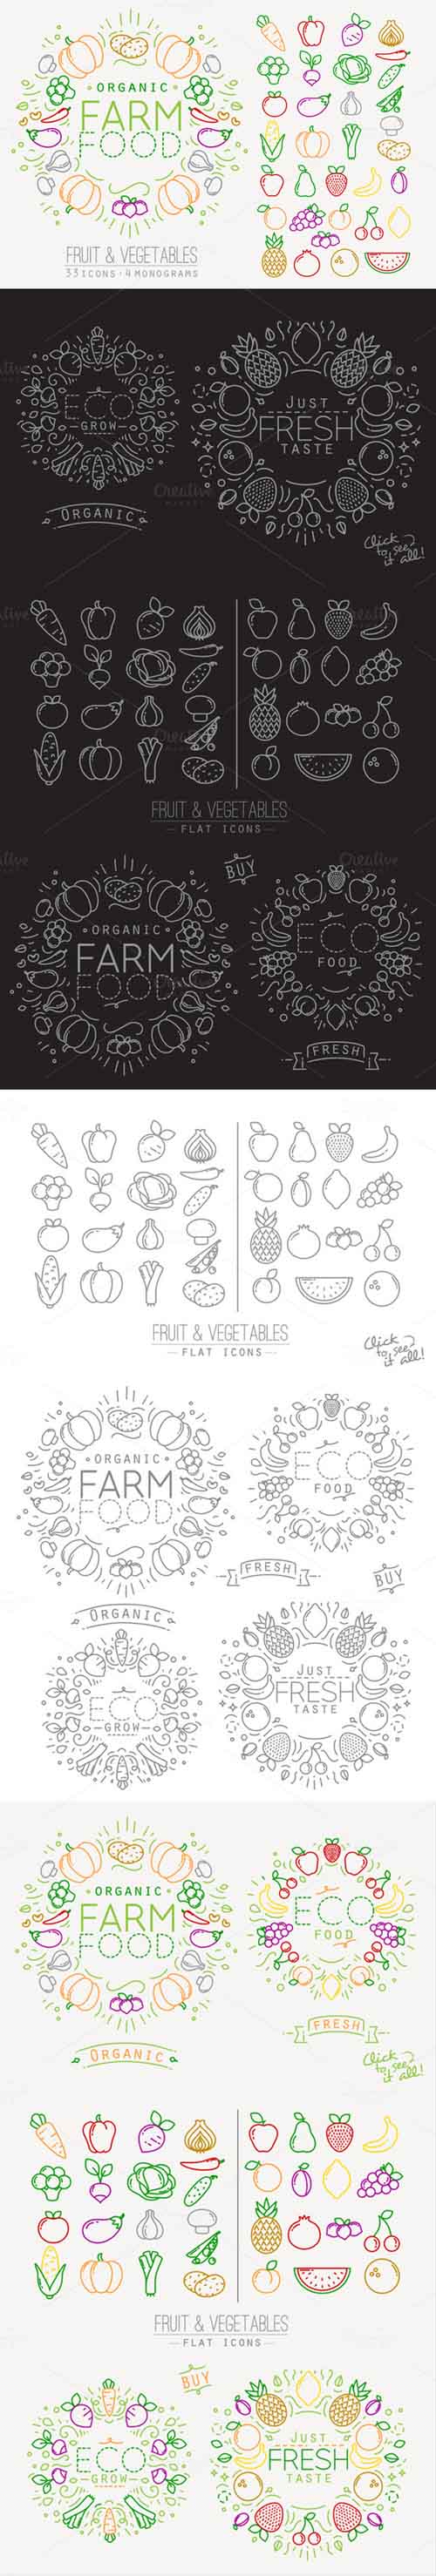 Flat Fruits & Vegetables Icons 378480